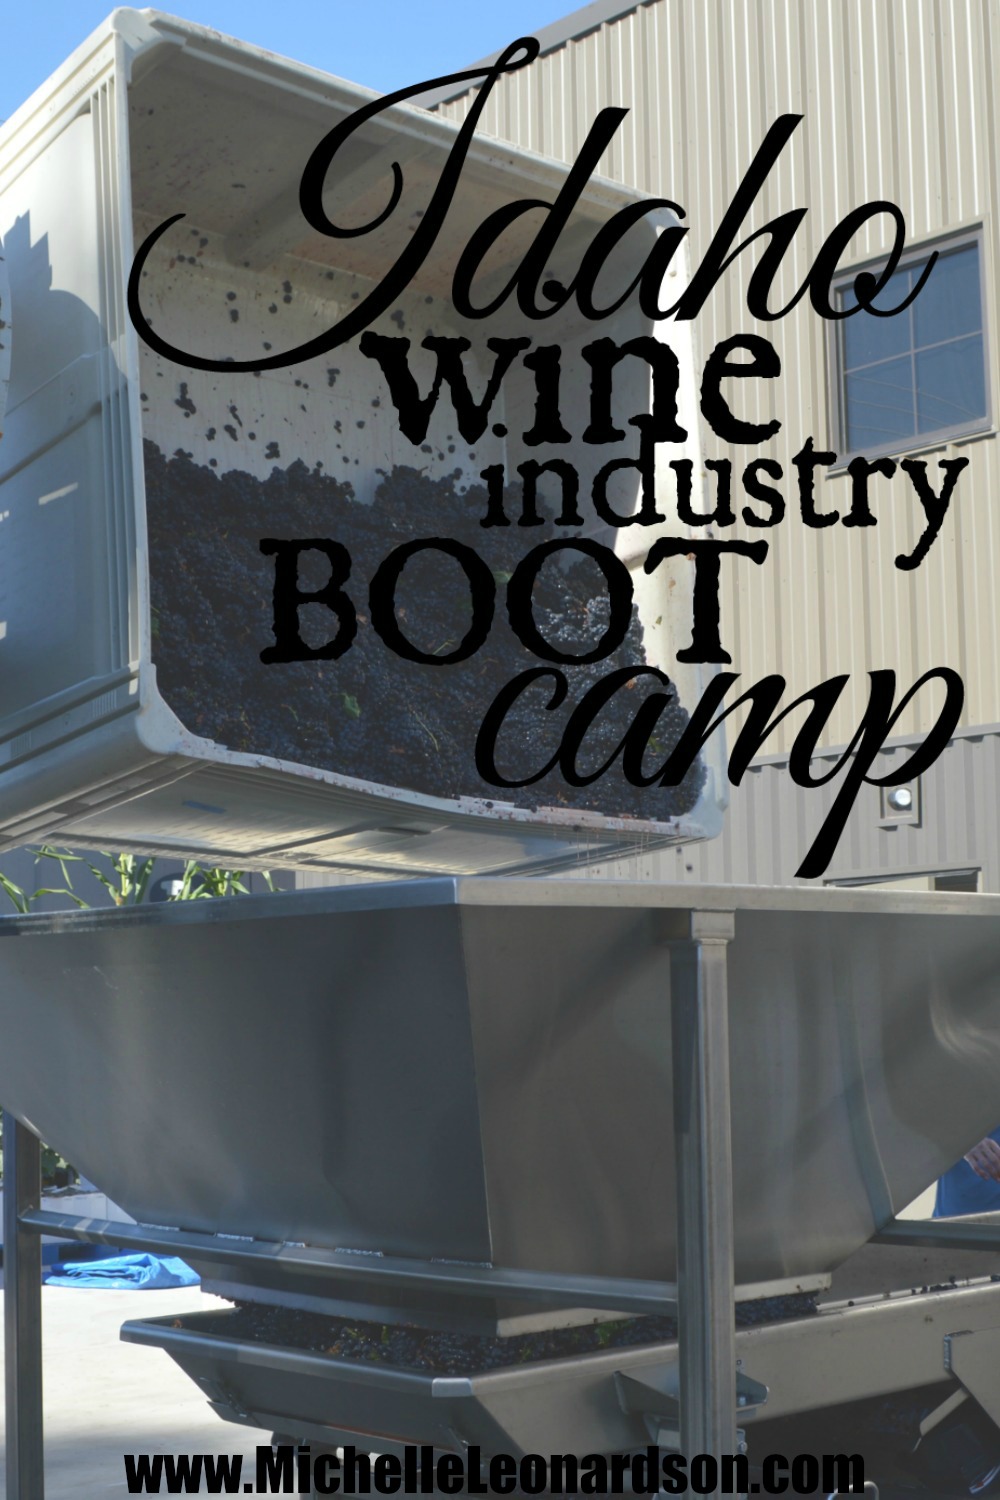 Finally a workout you can get behind - The Idaho wine industry boot camp! Drink your way from the Snake River Valley wine country to the Urban Winery District of Garden City, all the while learning what makes this up and coming wine region special.